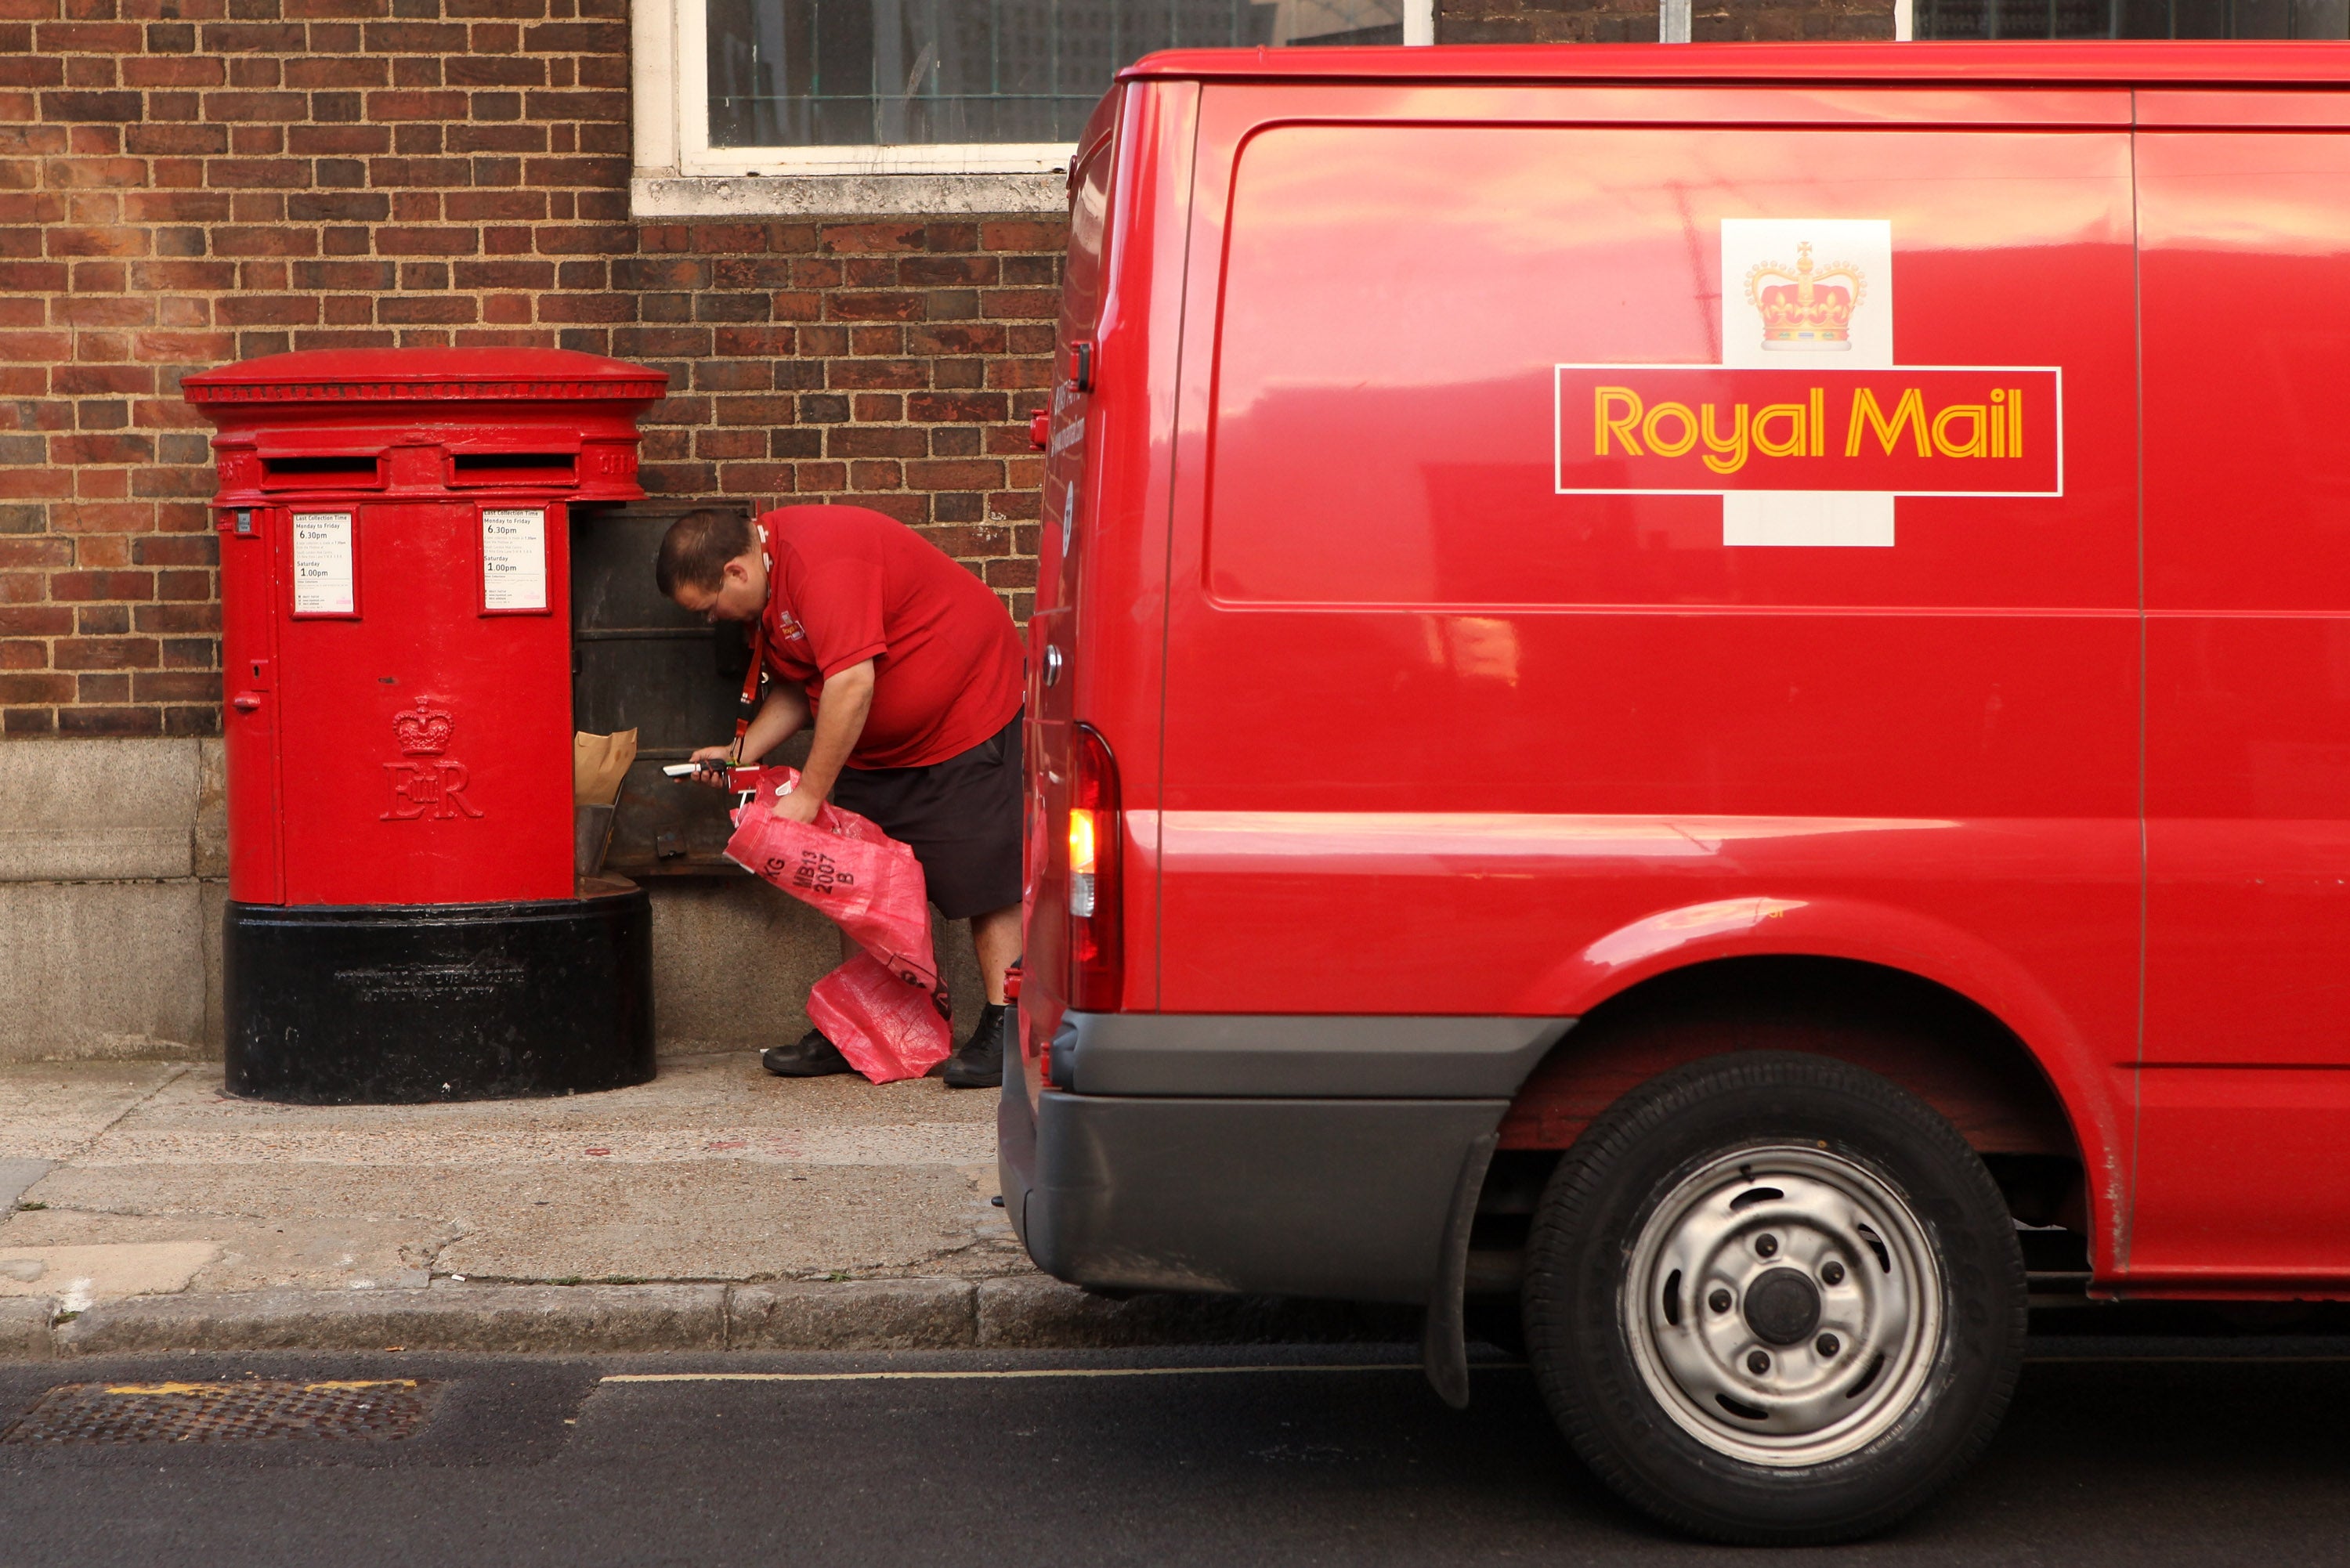 Staff shortages, together with increased demand, has resulted in delays to the postal service